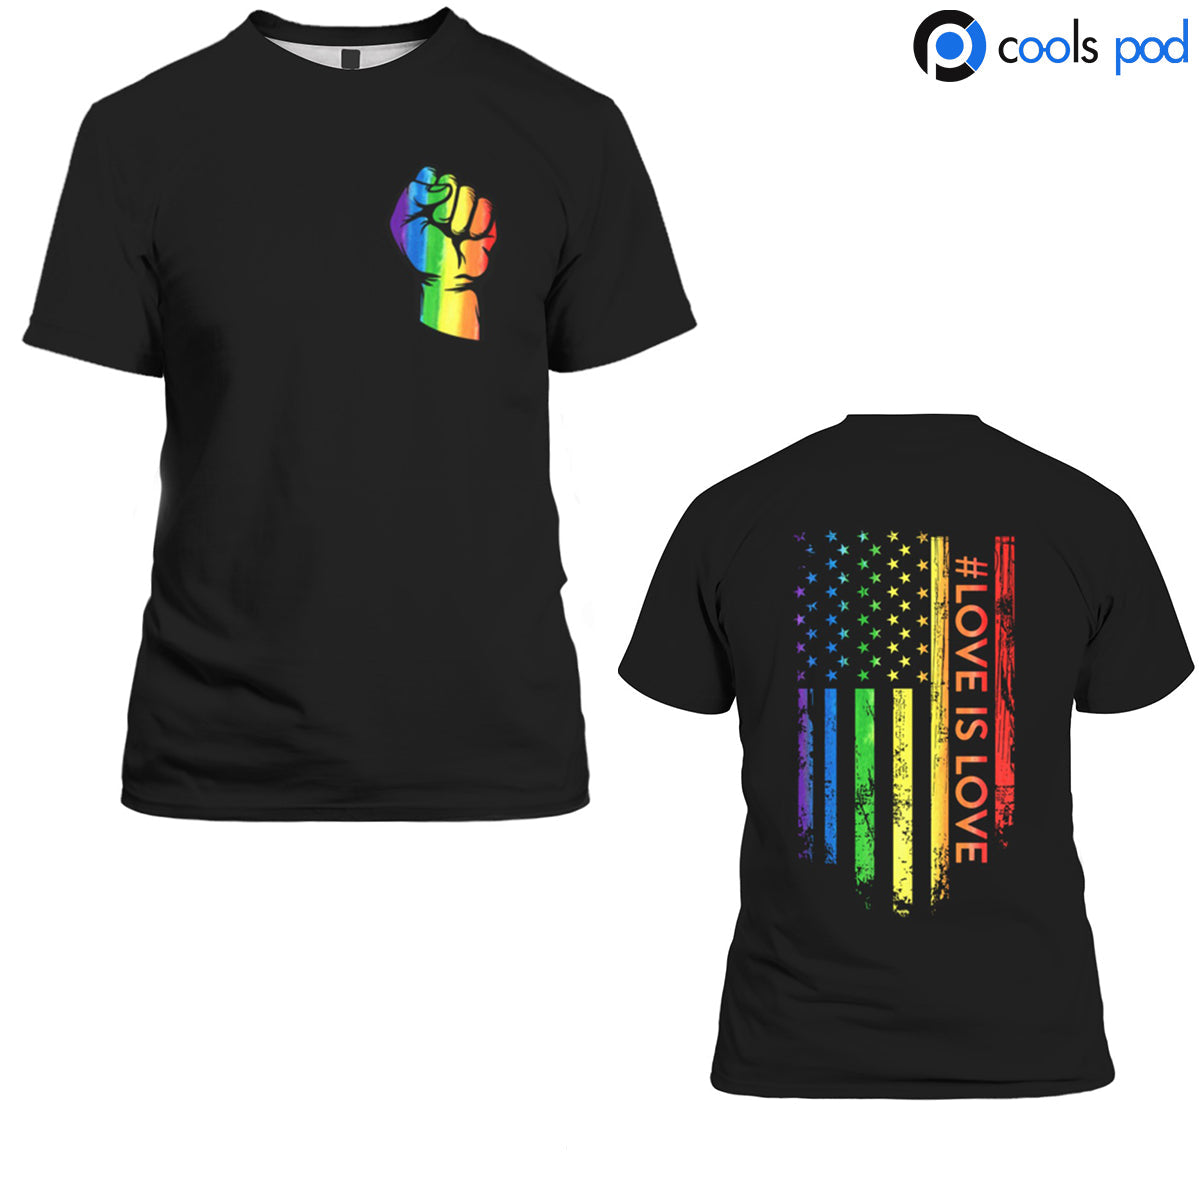 Coolspod 3D All Over Printed Unisex Love Is Love T Shirt LGBT Shirt Couple Lesbian Couple Gay Pride Shirts